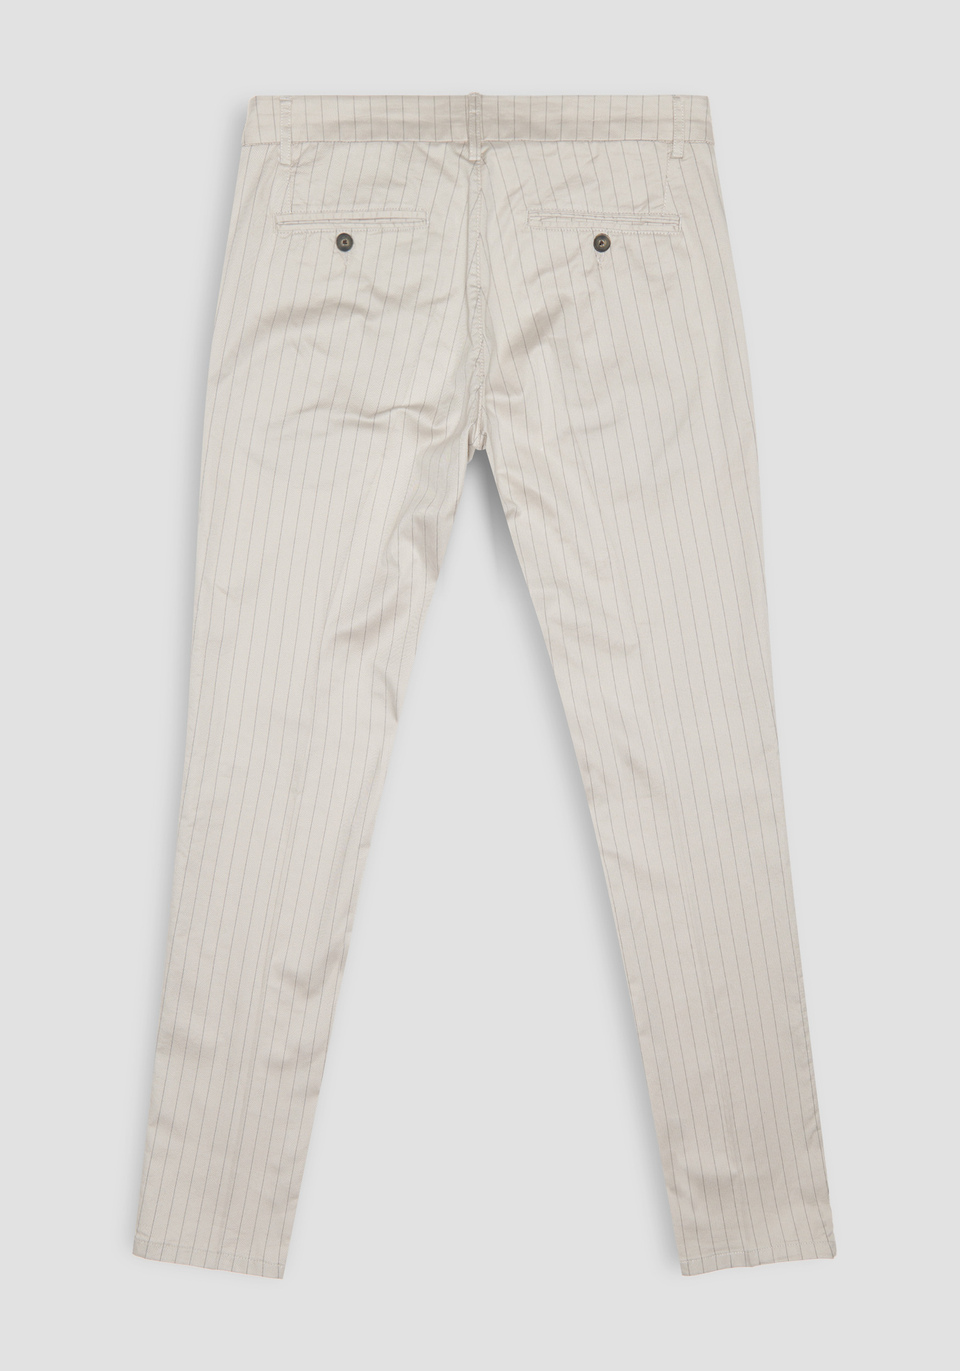 SKINNY-FIT “BRYAN” TROUSERS IN STRIPED COTTON AND LINEN - Antony Morato Online Shop